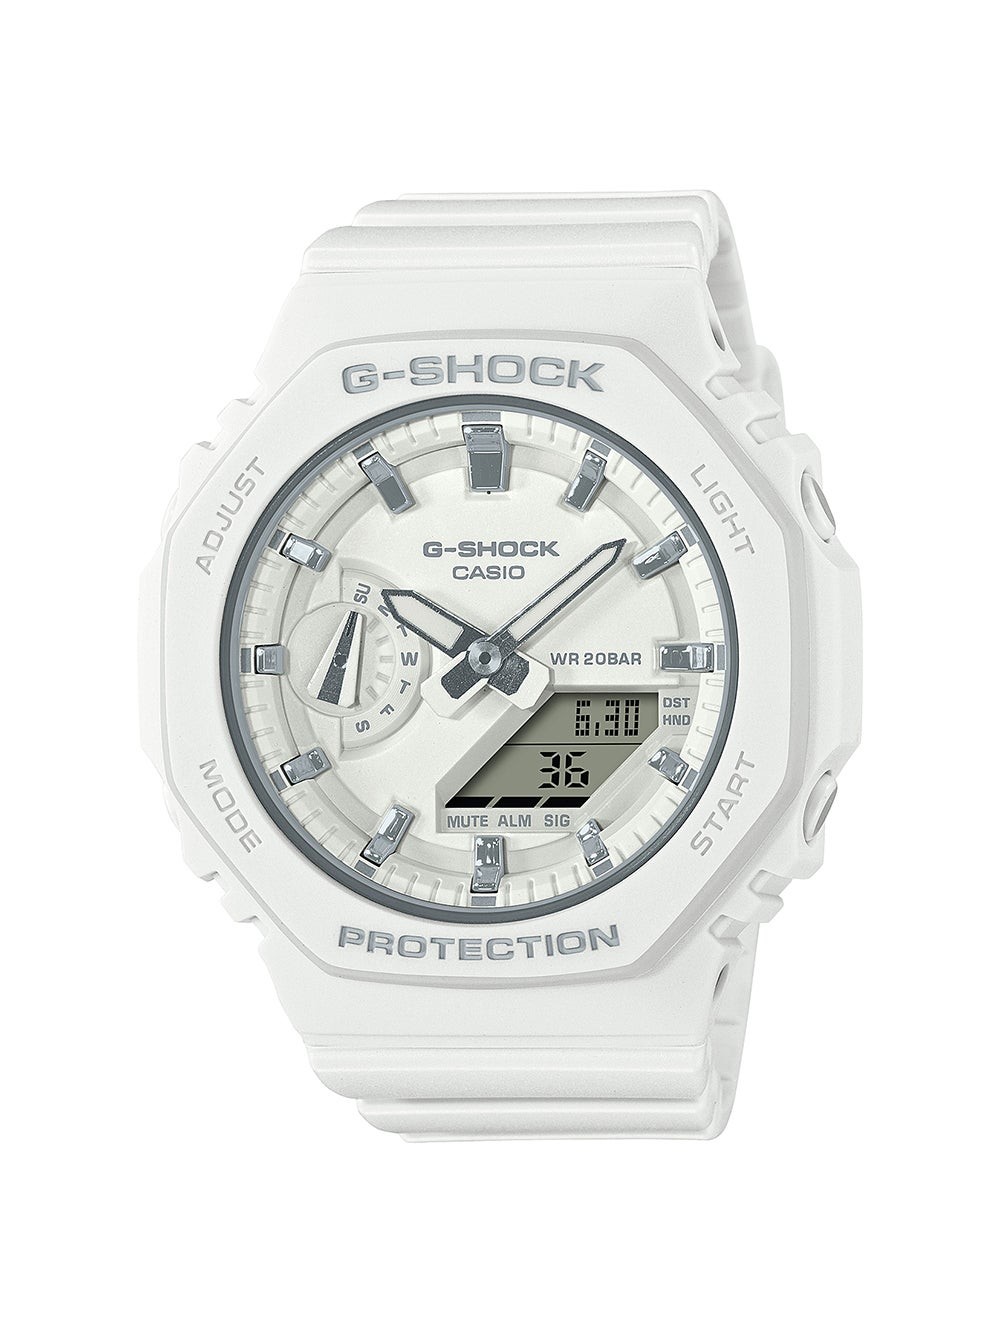 Ladies Compact G-Shock Carbon Core Analog/Digital White Watch White Dial